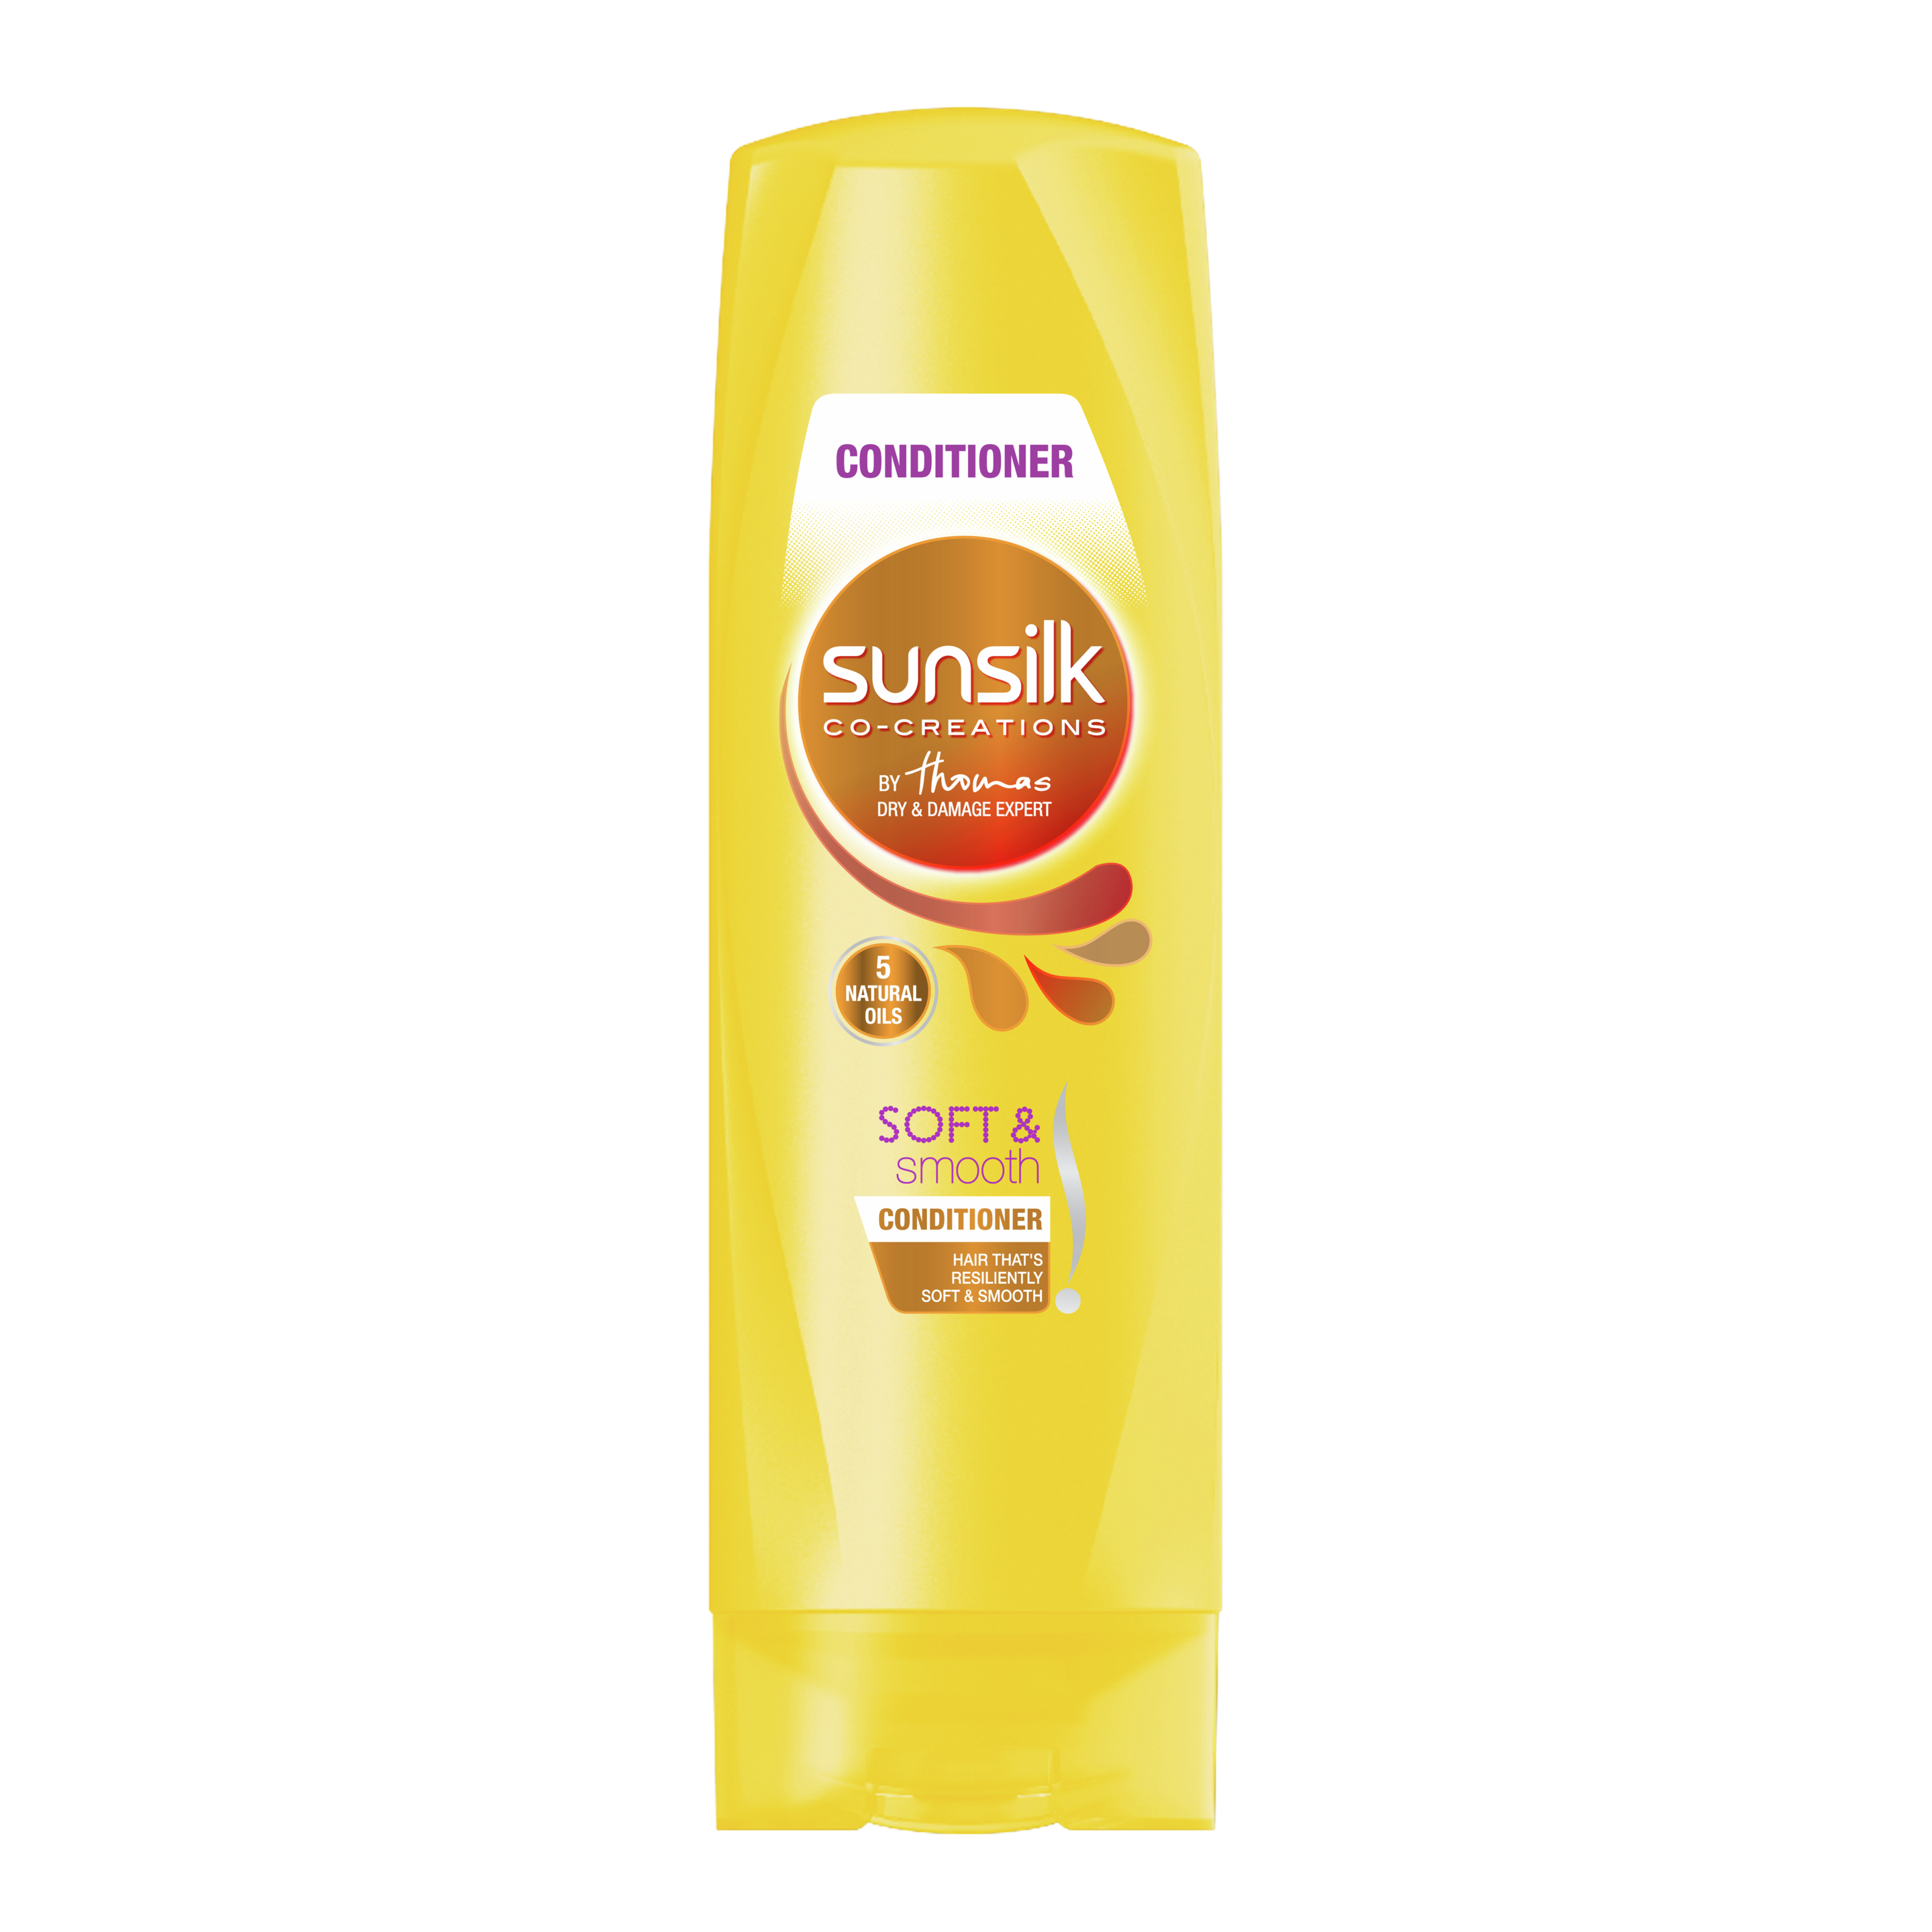 Sunsilk Soft and Smooth Conditioner 160ml front of pack image